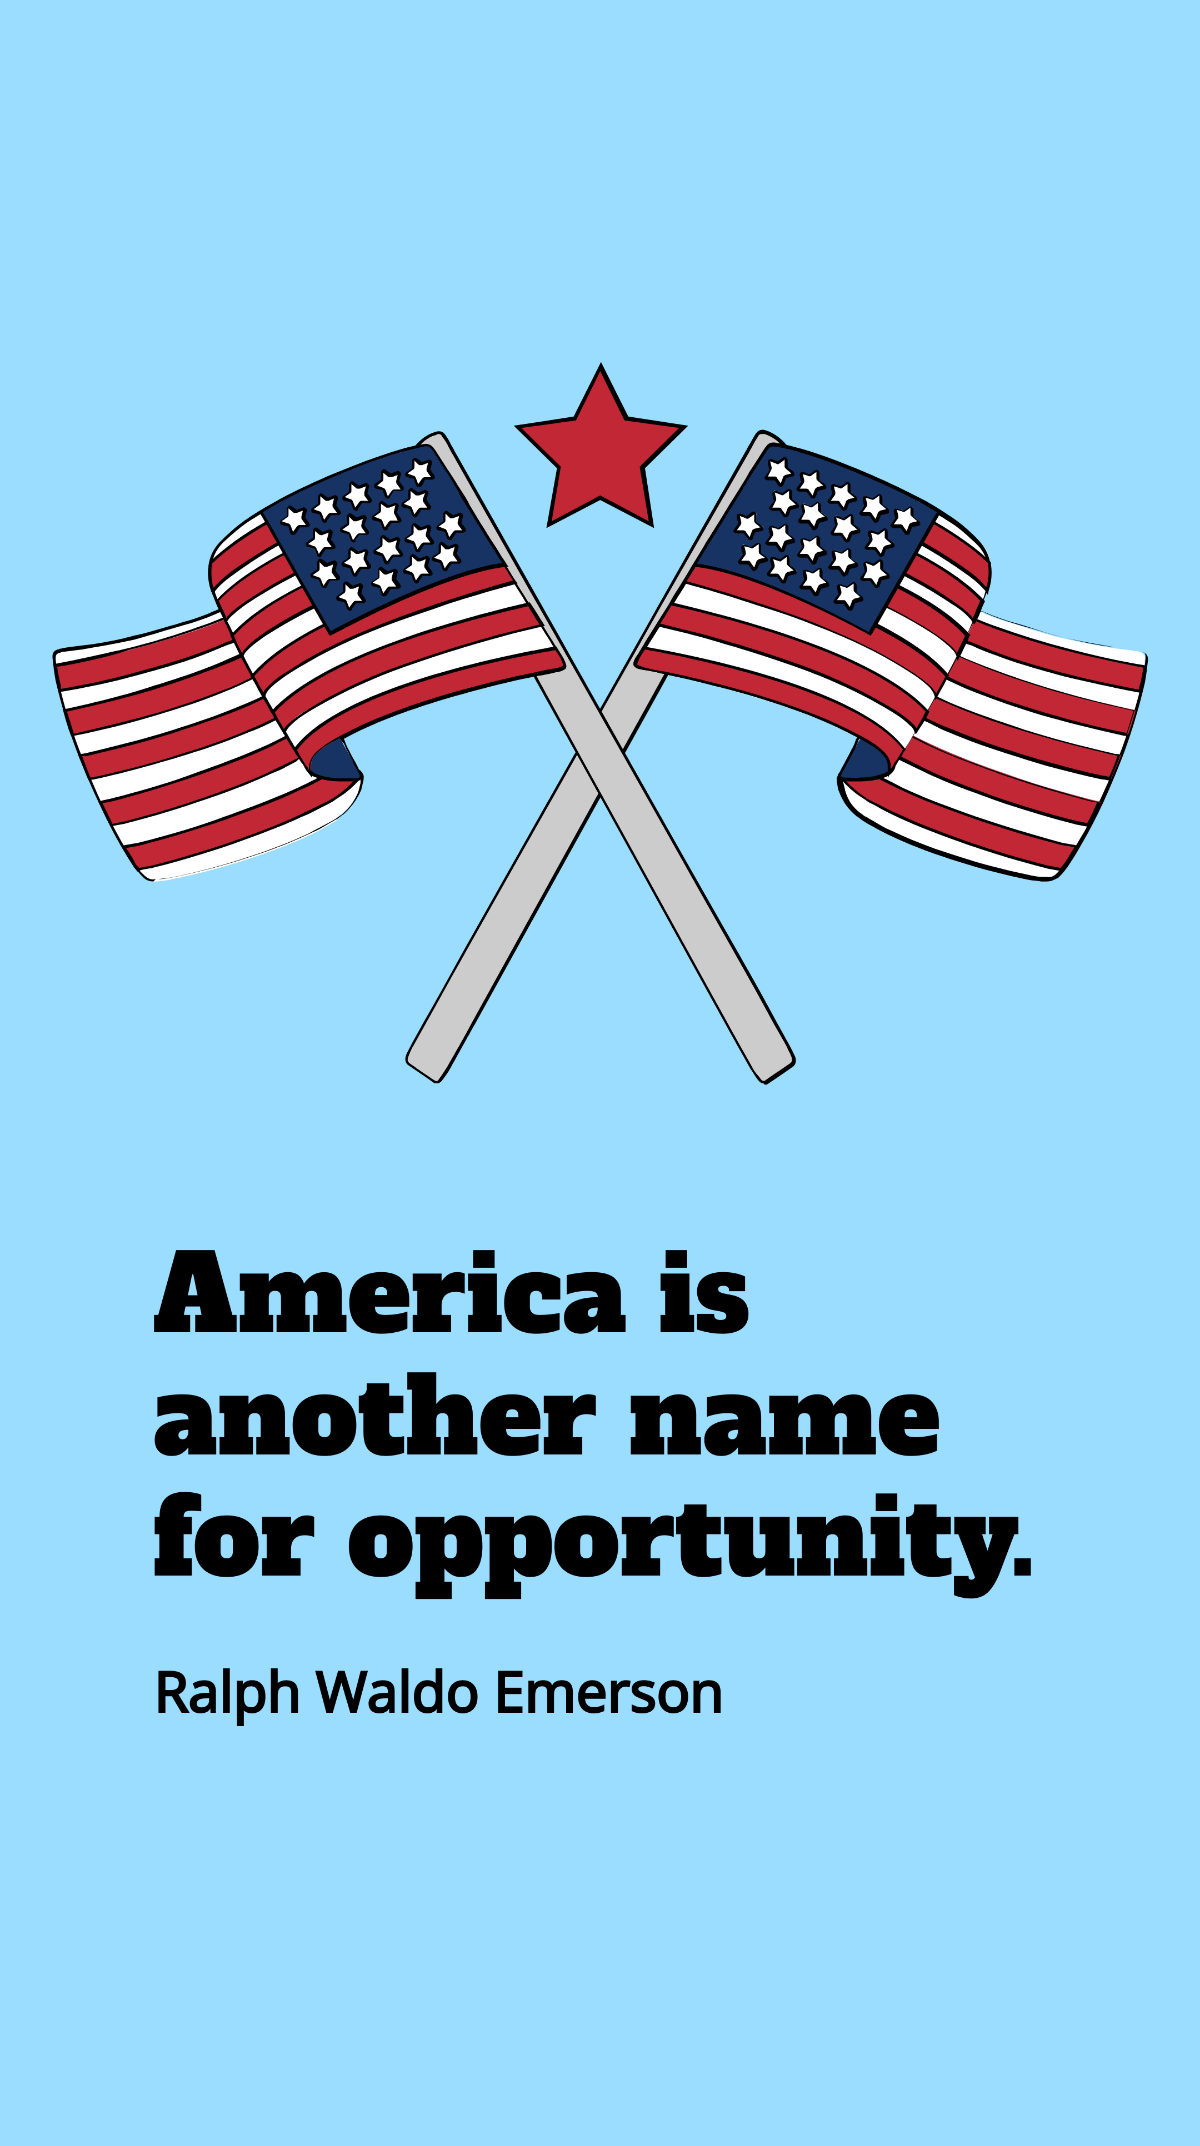 Ralph Waldo Emerson - America is another name for opportunity. Template